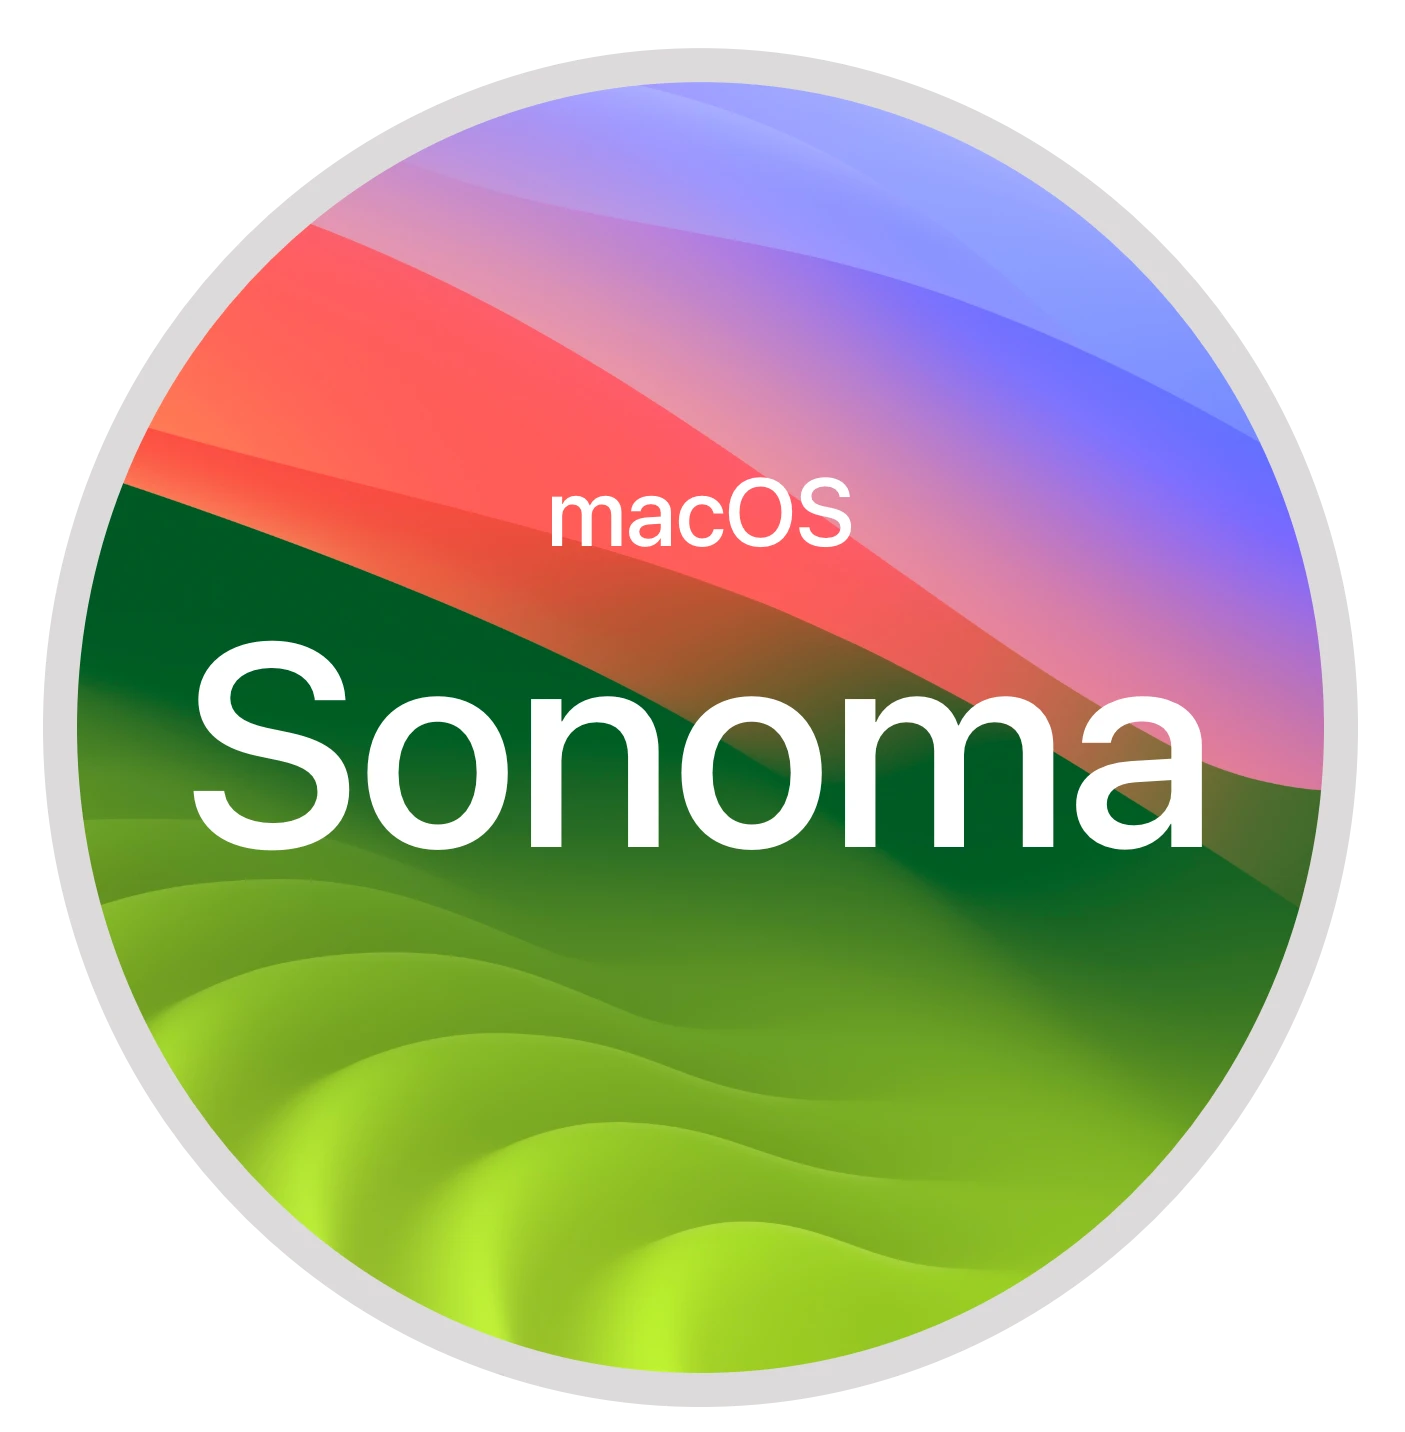 SimpleumSafe is compatible with macOS 14